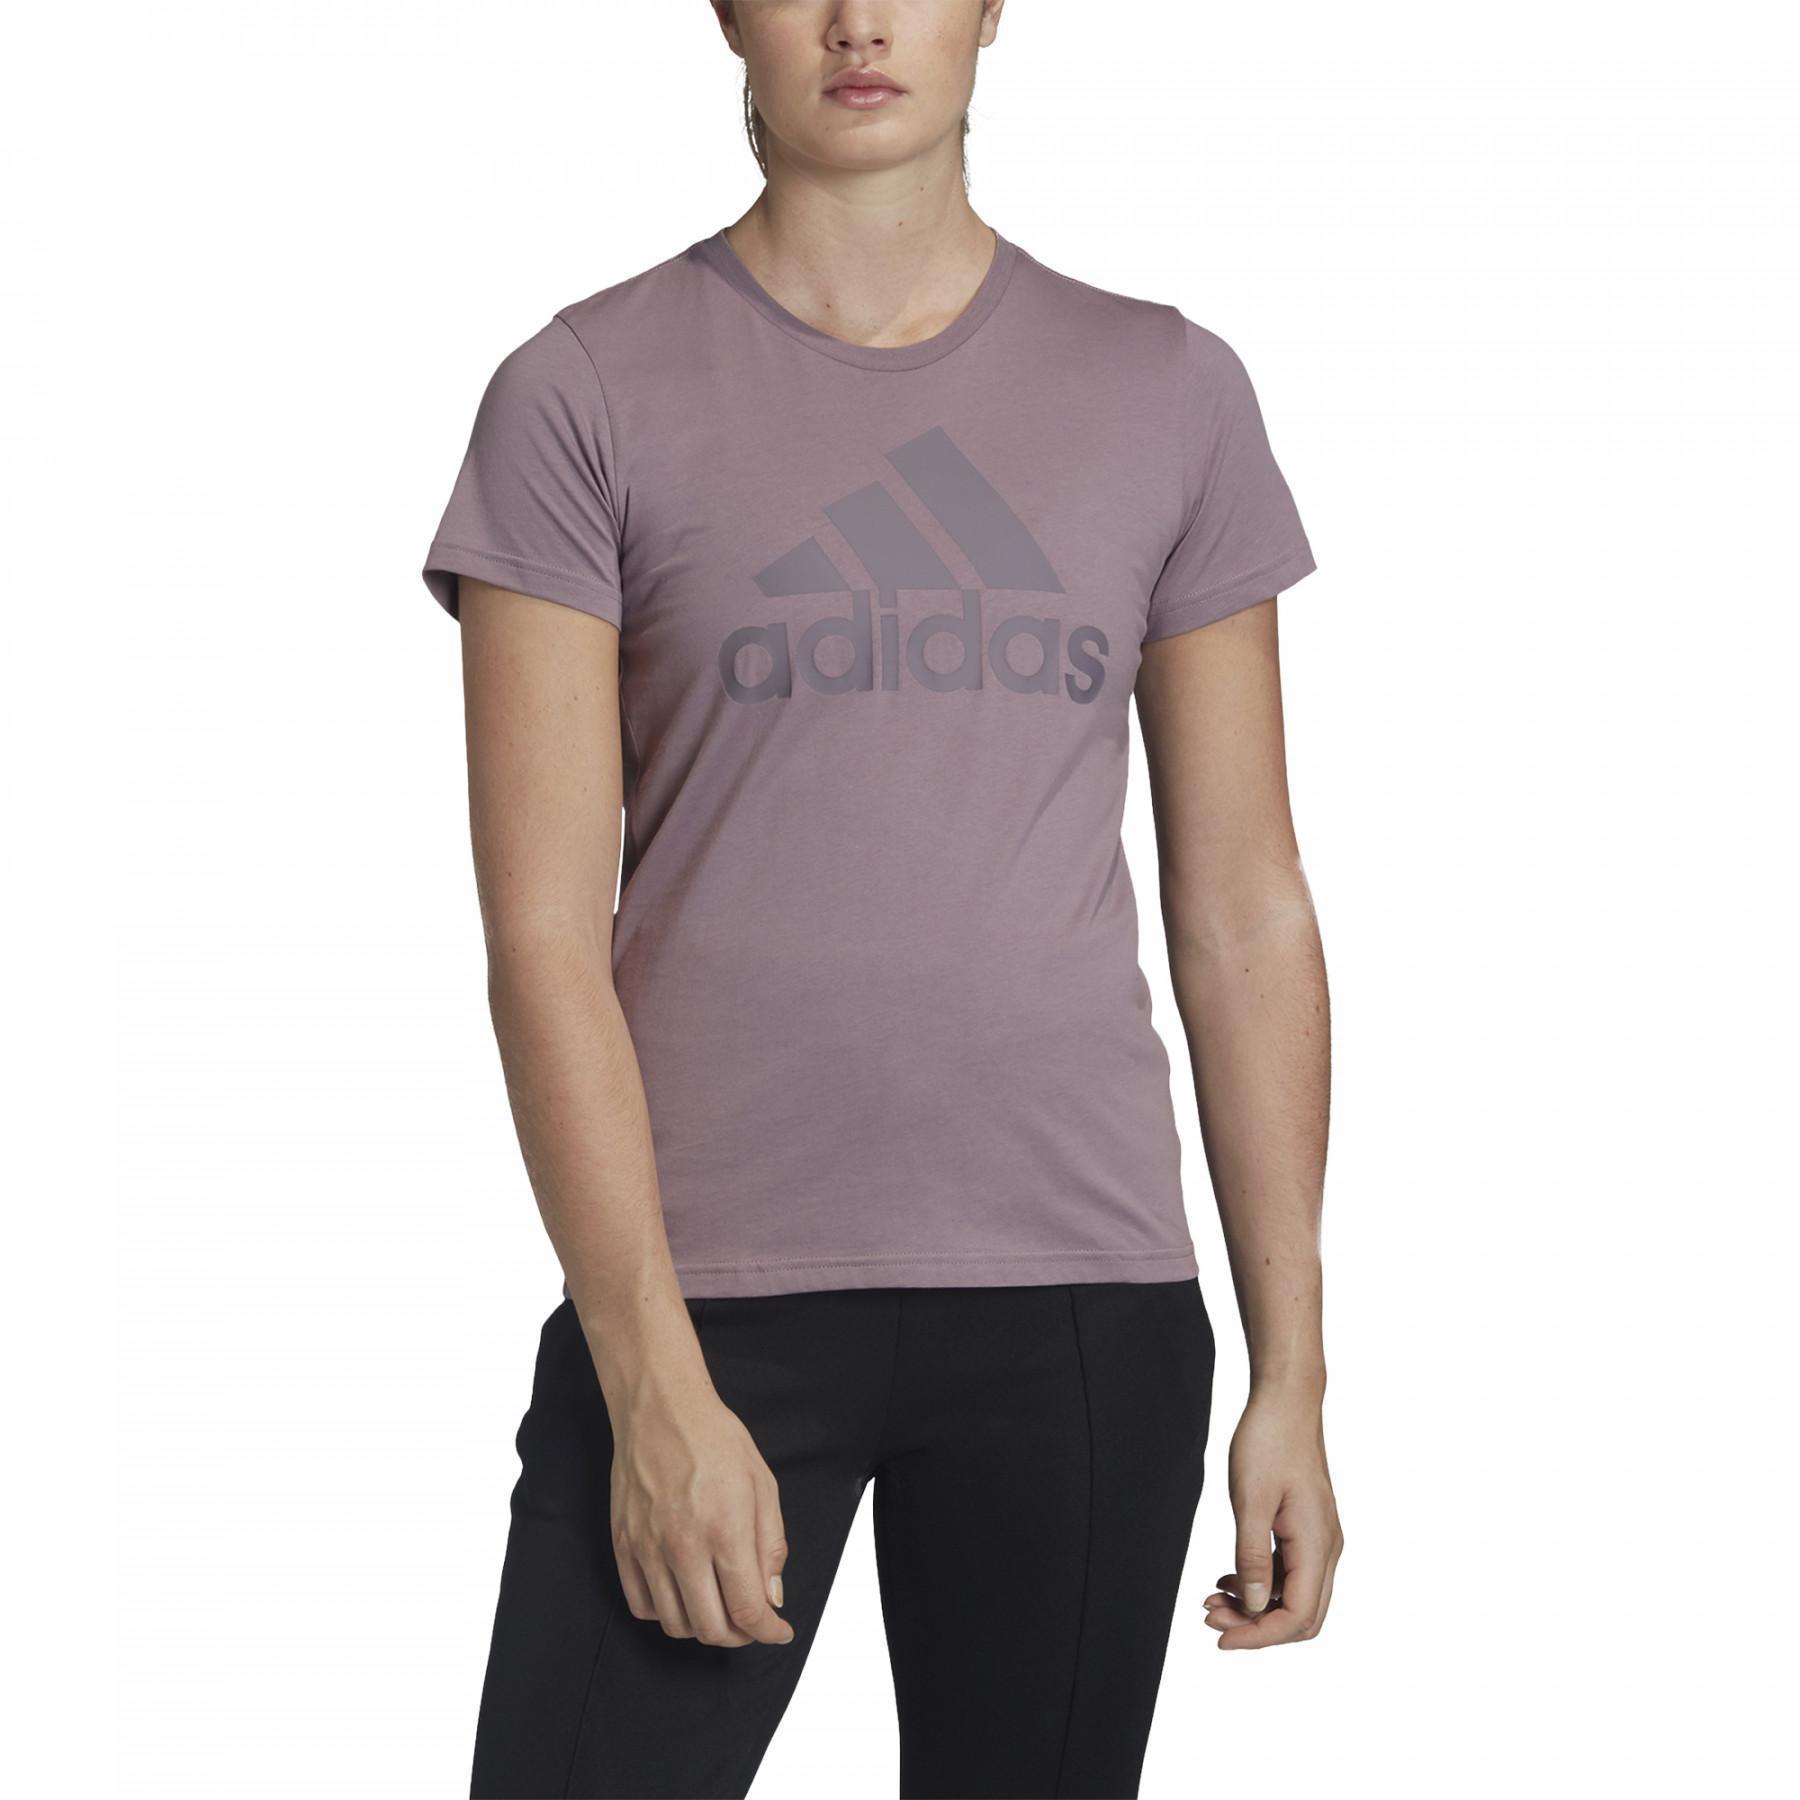 Women's T-shirt adidas Must Haves Badge of Sport